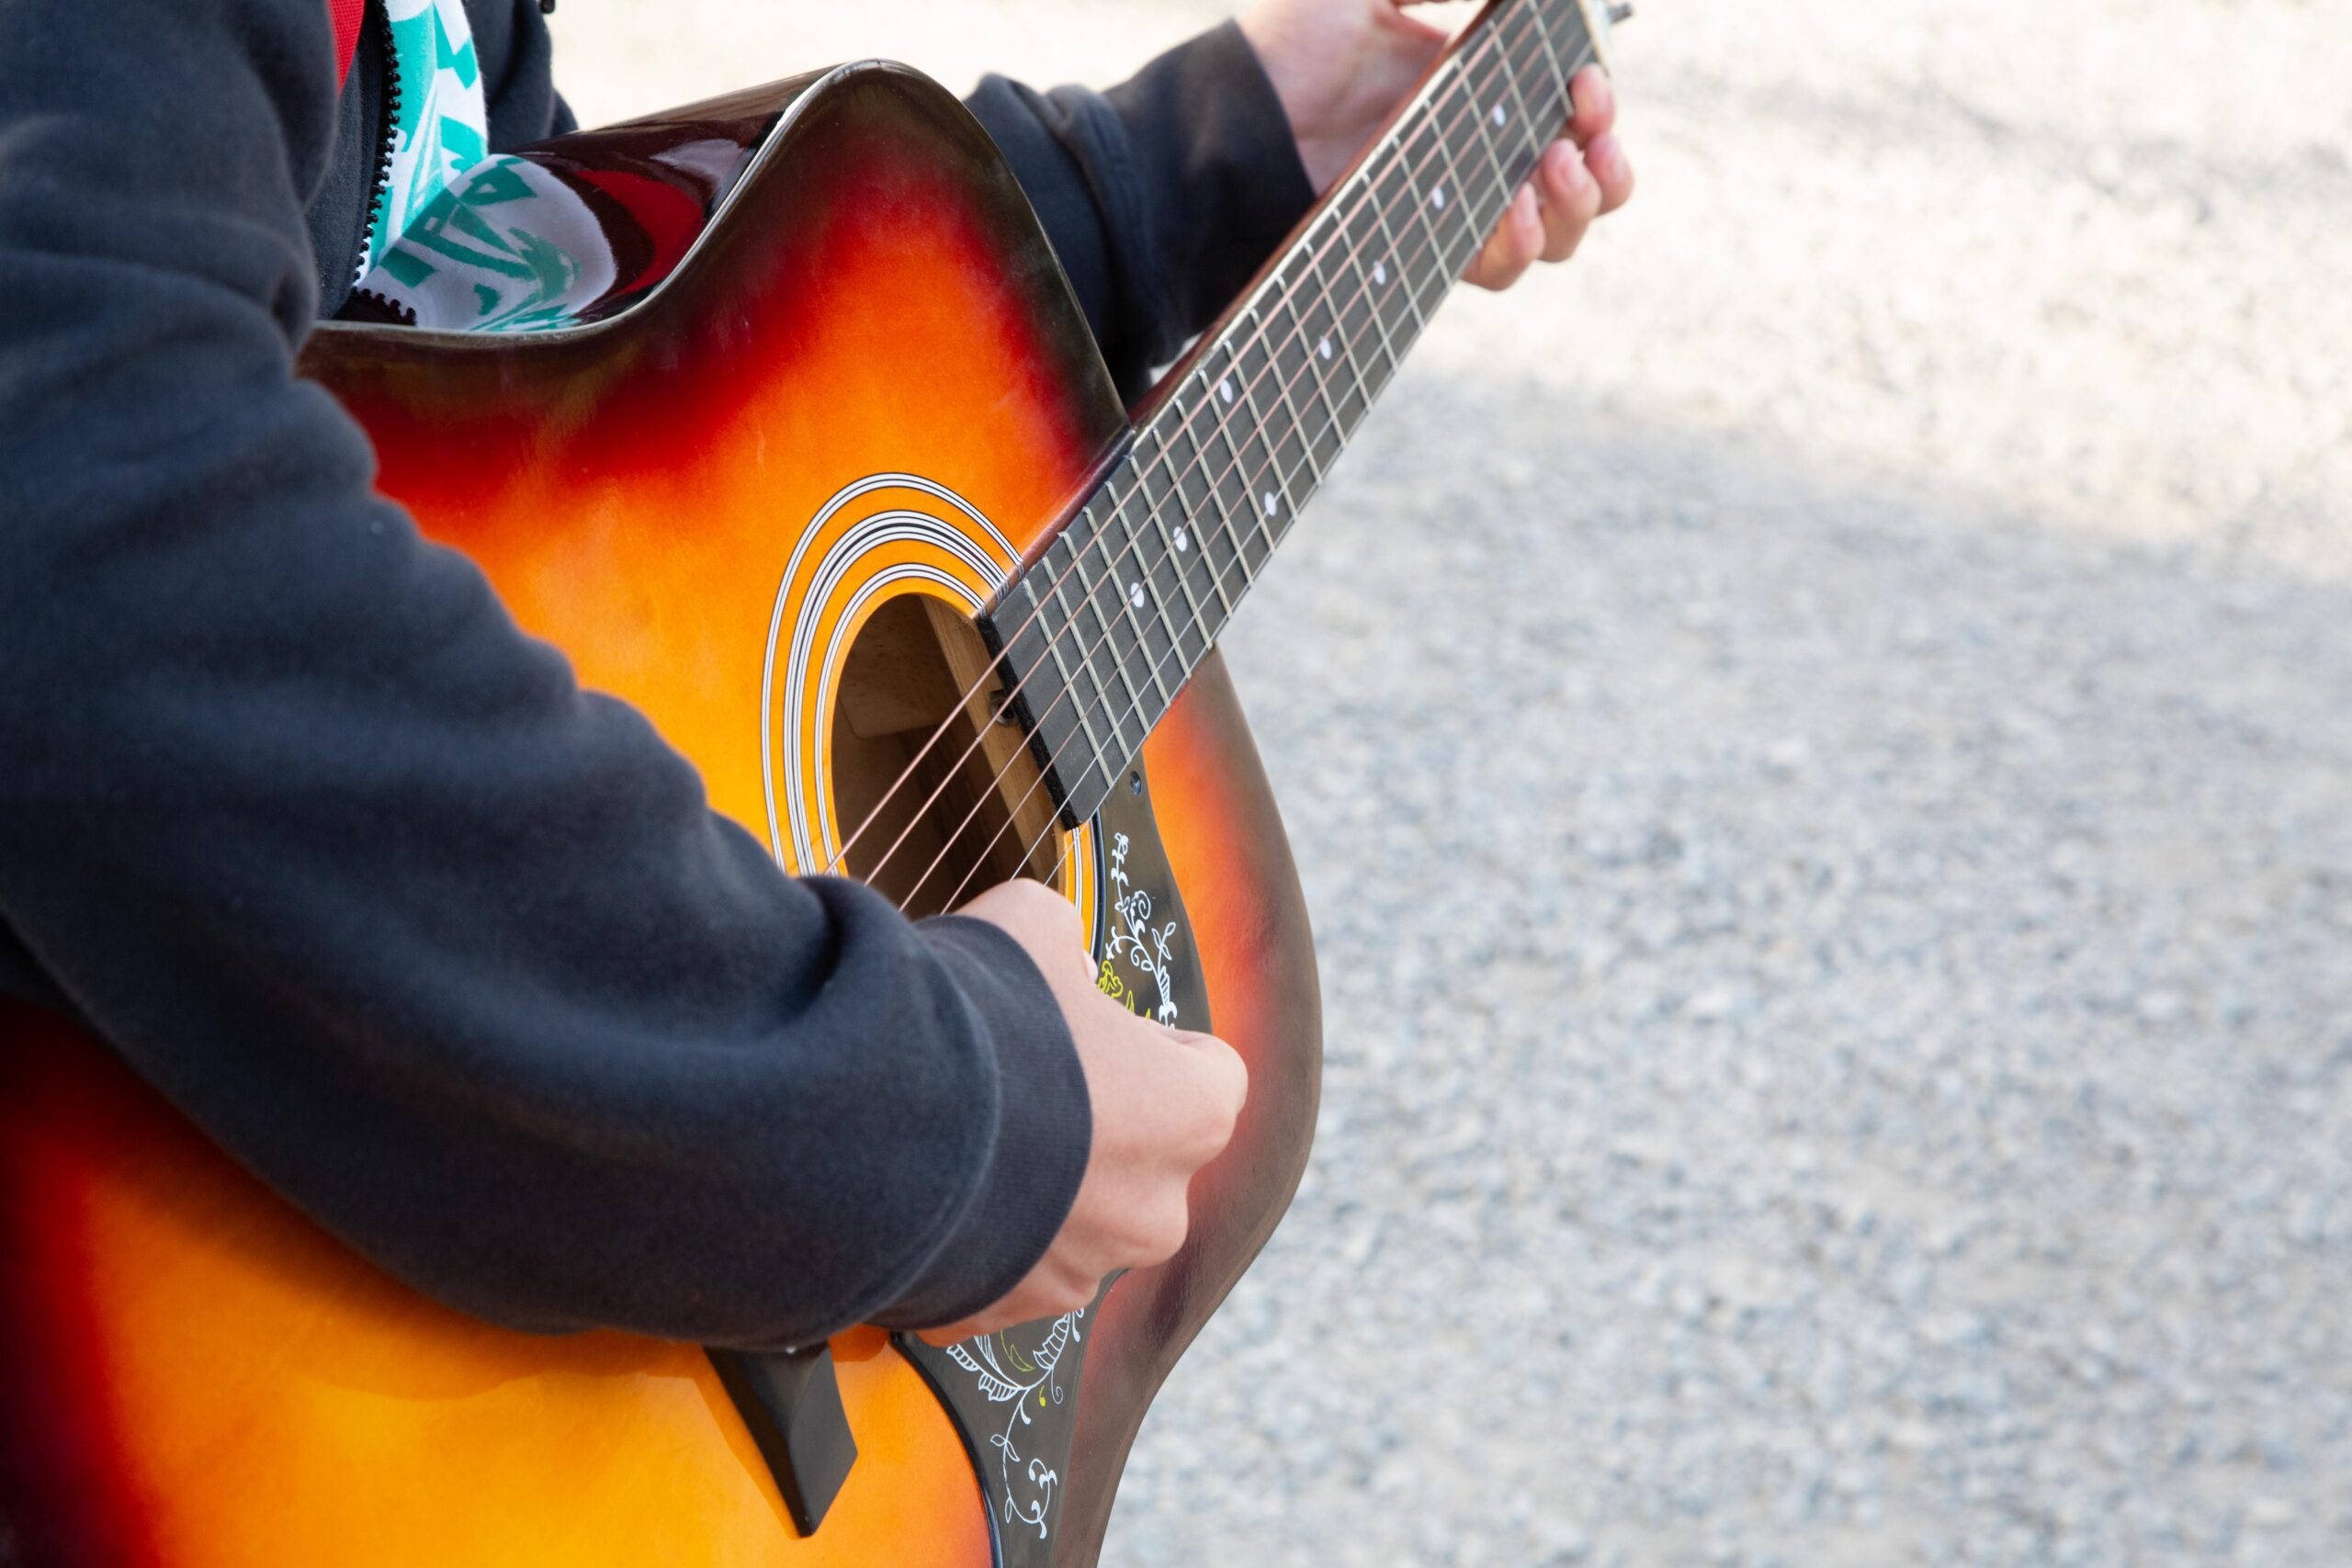 Acoustic Music Camp should strike a chord with music lovers